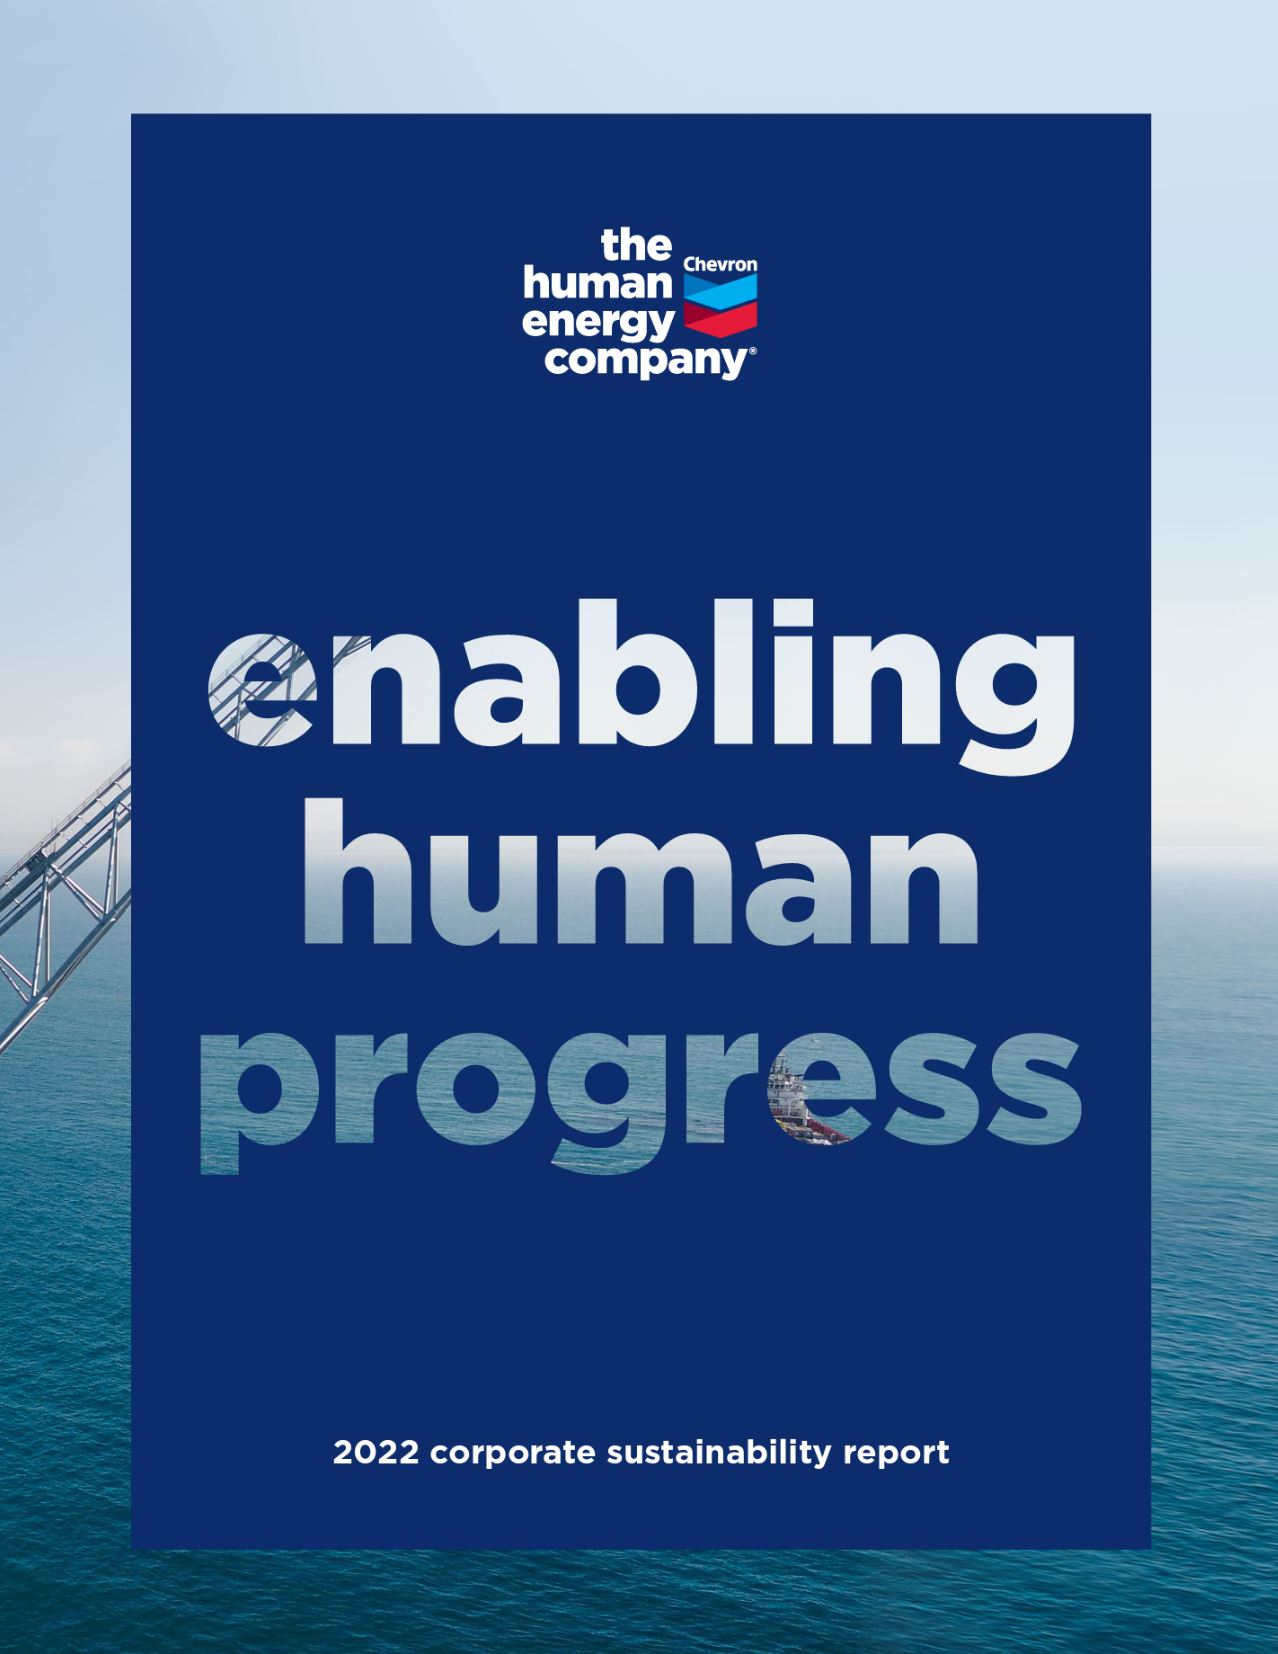 Thumbnail photo of cover of 2022 Chevron corporate sustainability report